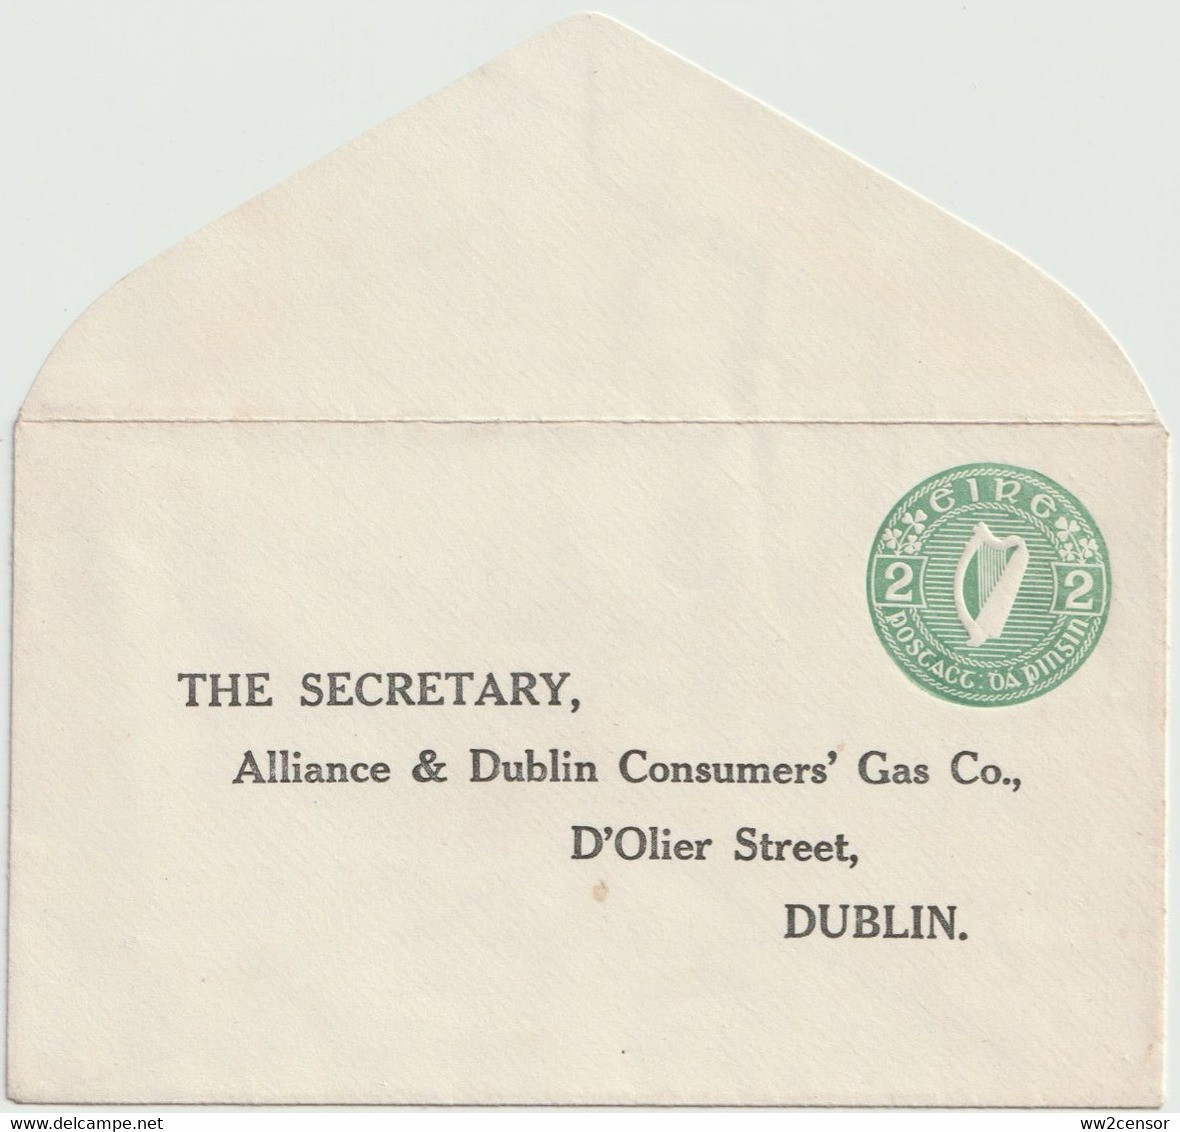 Ireland Irland Alliance & Dublin Consumers' Gas Co. Stamped To Order Postal Stationery 2d Envelope High Catalogue Value - Ganzsachen